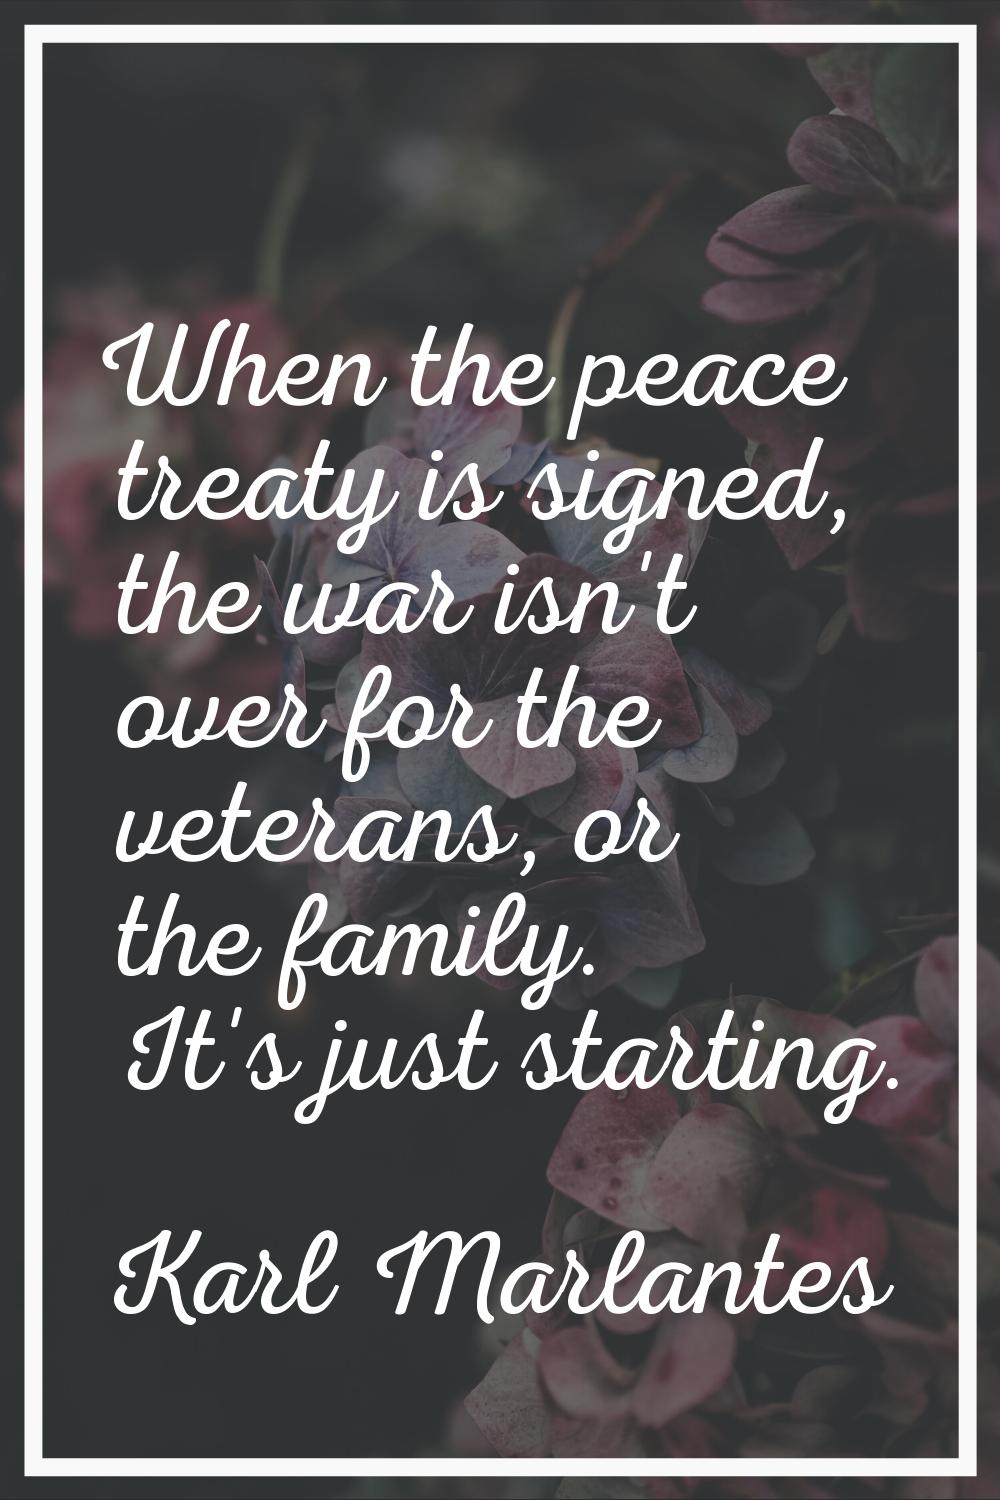 When the peace treaty is signed, the war isn't over for the veterans, or the family. It's just star